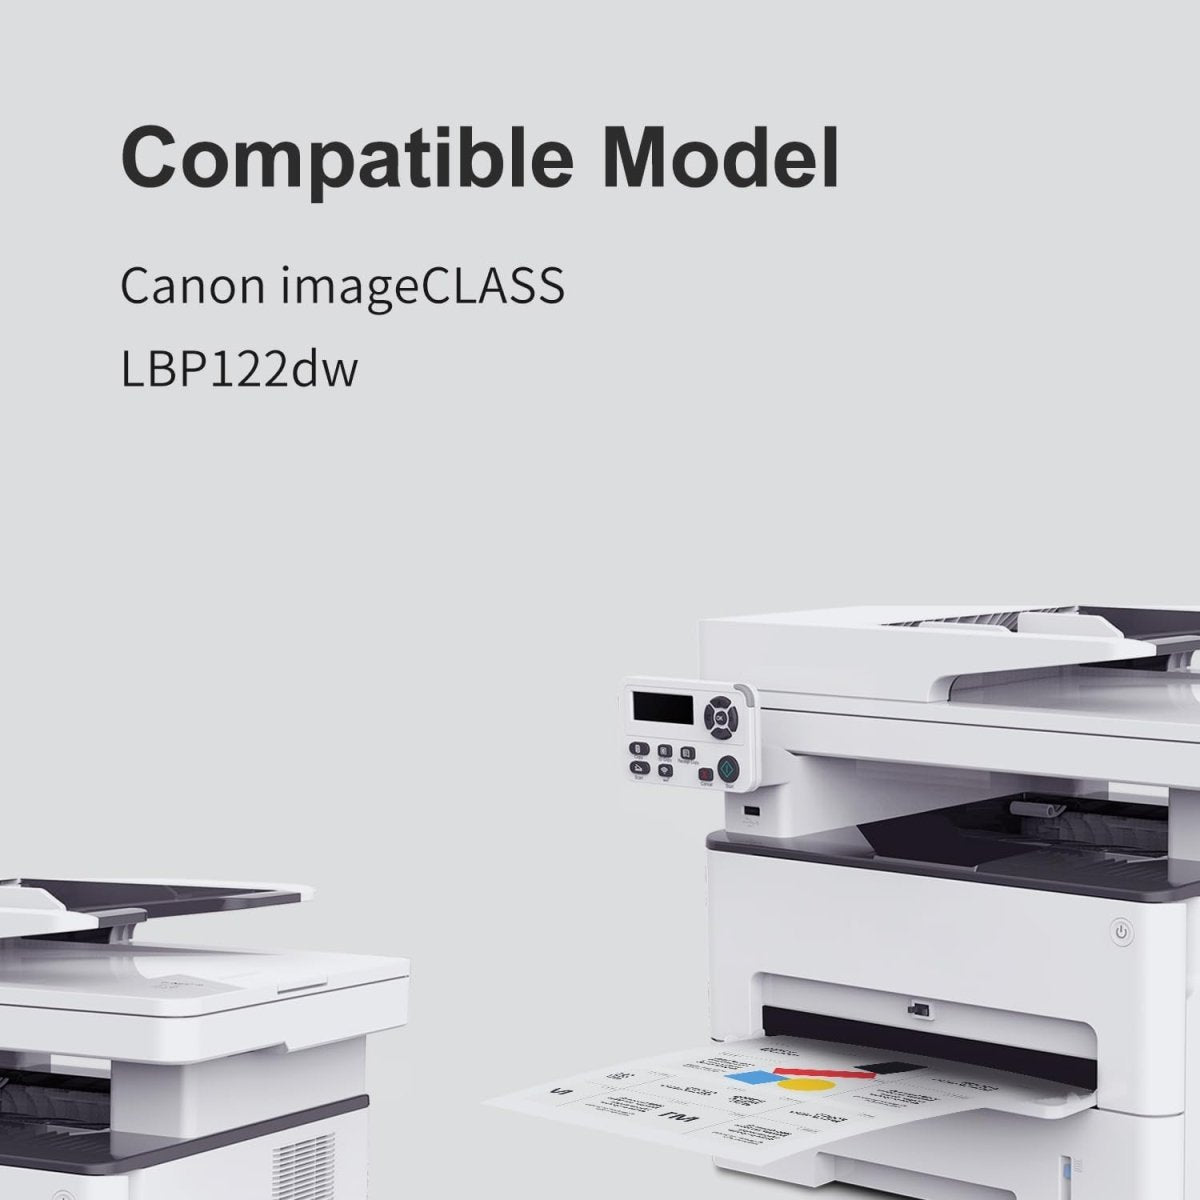 Compatible Canon 071H Black Toner Cartridge - High Yield - 2-PK - With Chip - Linford Office:Printer Ink & Toner Cartridge